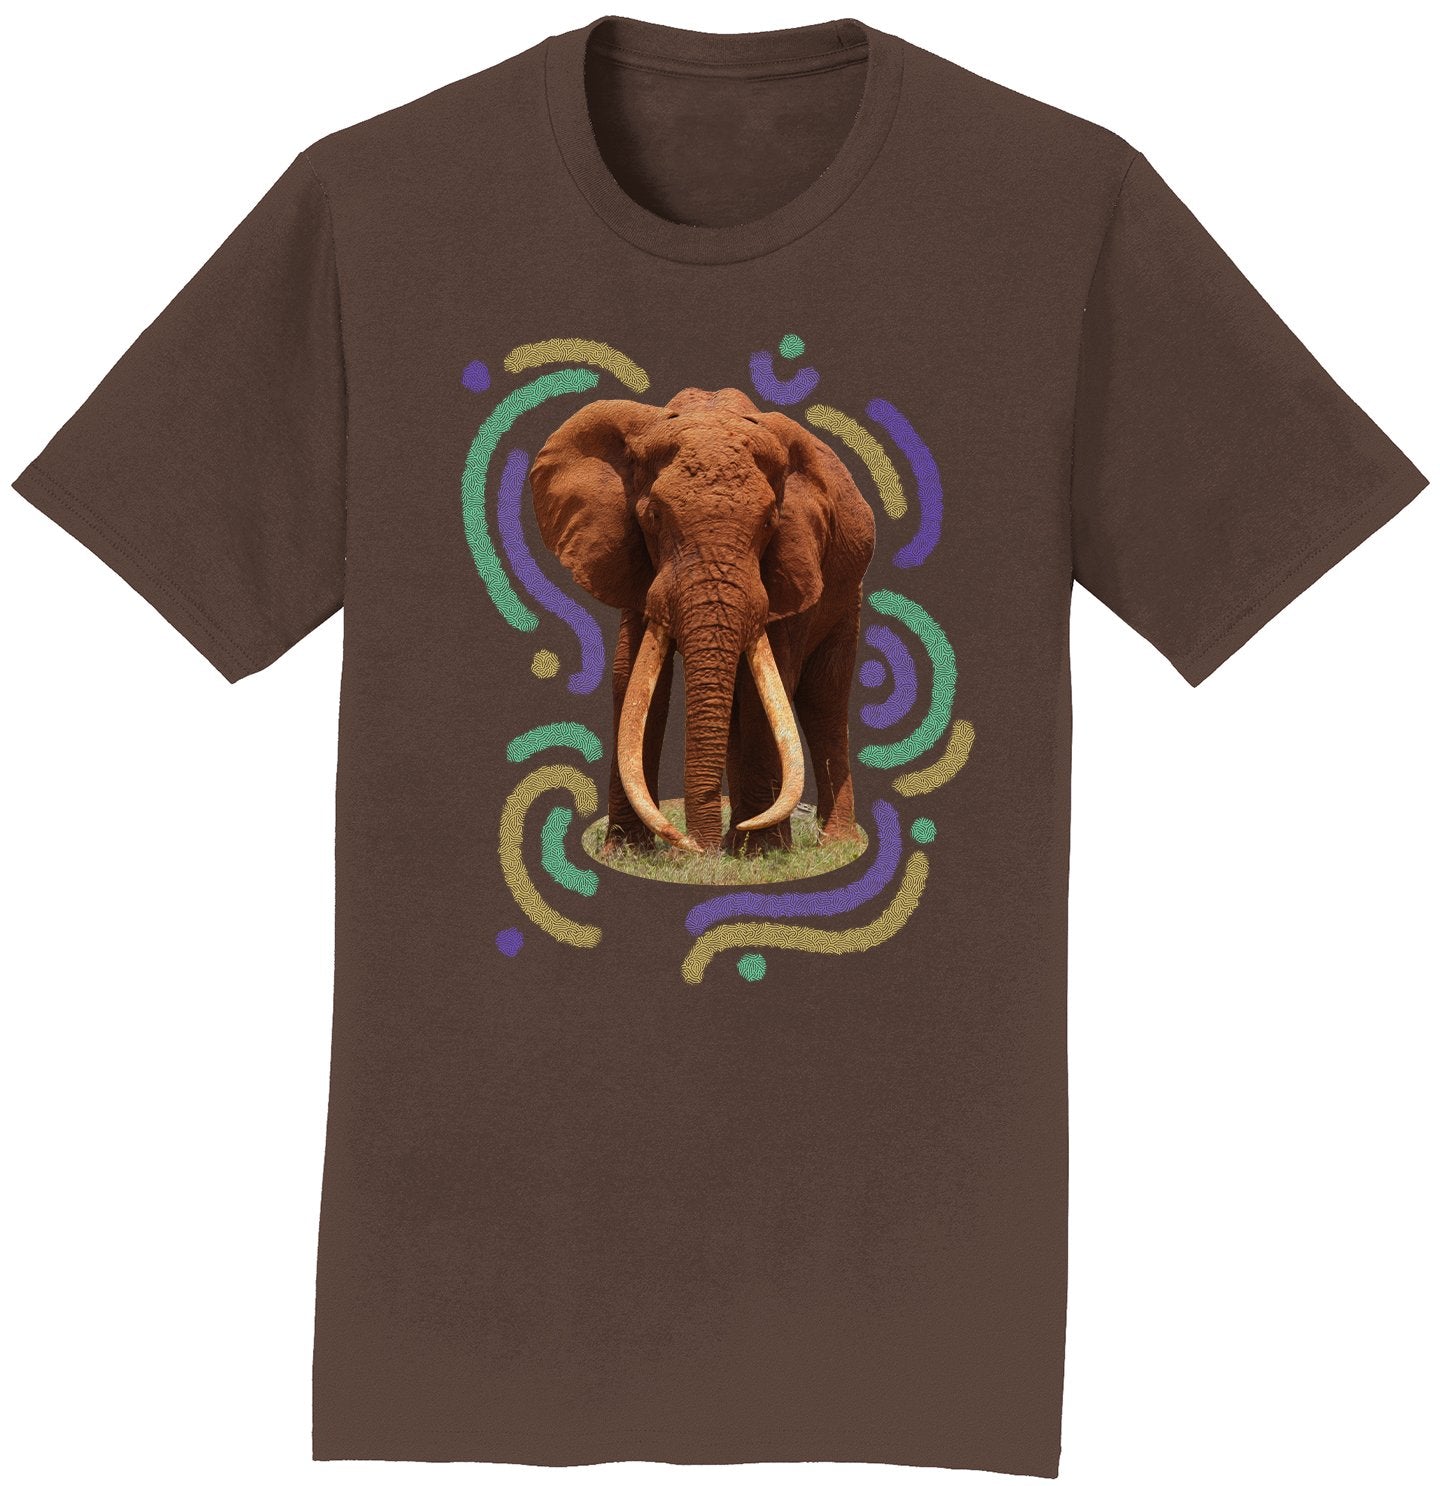 Wiggly Lines Elephant - Adult Unisex T-Shirt